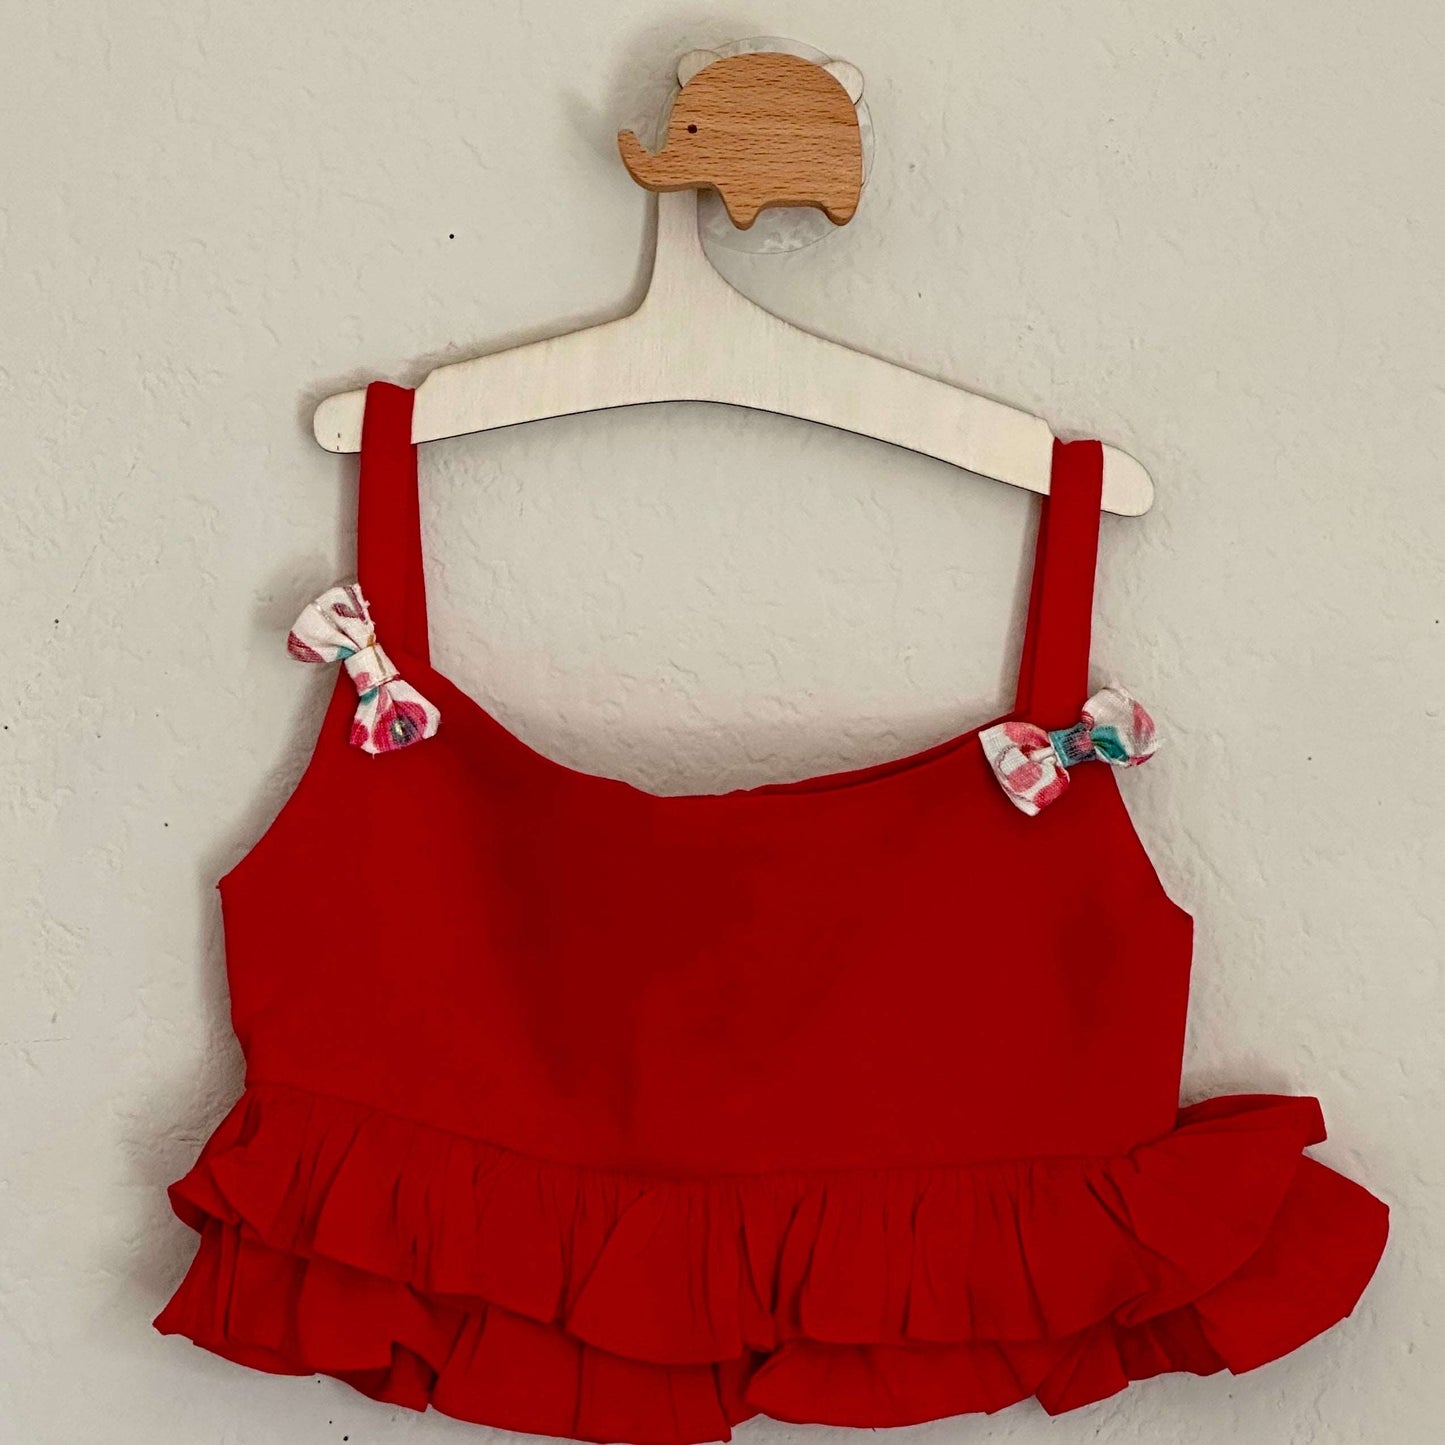 Rayon Spaghetti Crop Top With Ruffles | 2 Layers High Low Skirt | 4-5 Yrs - Kalas Couture